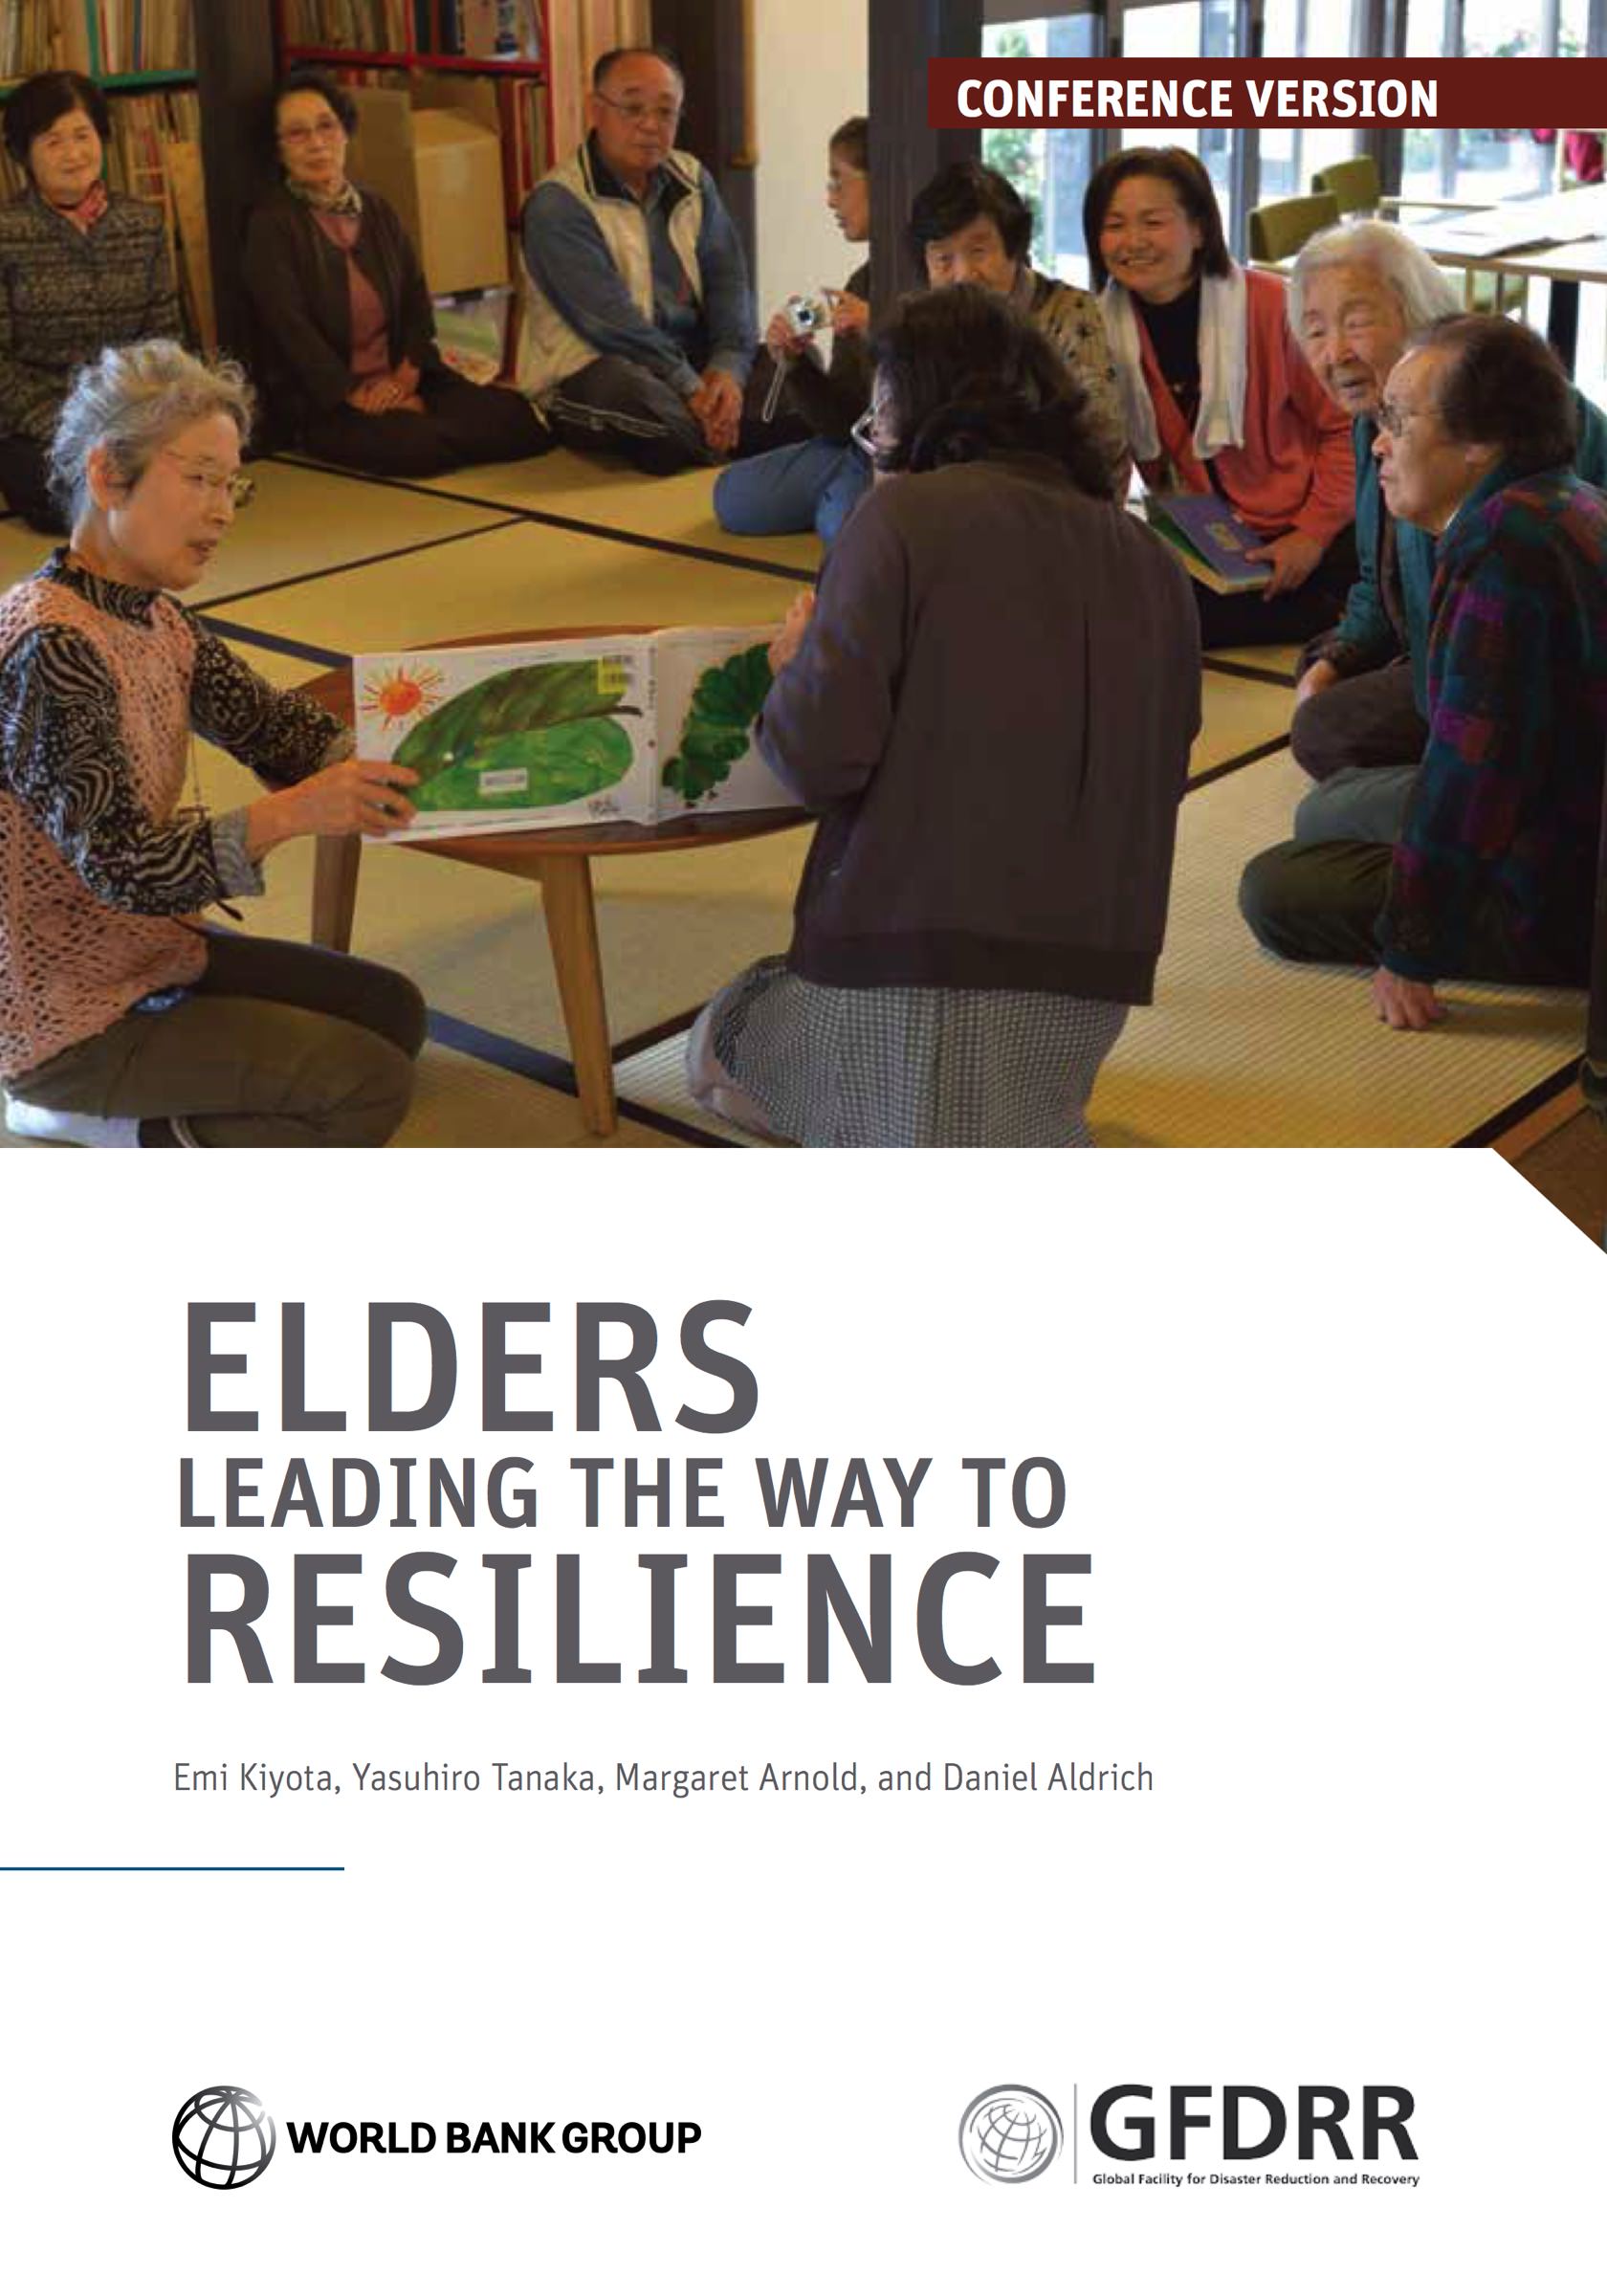 150318Elders-Leading-the-Way-to-Resilience-Conference-Version [Cover]